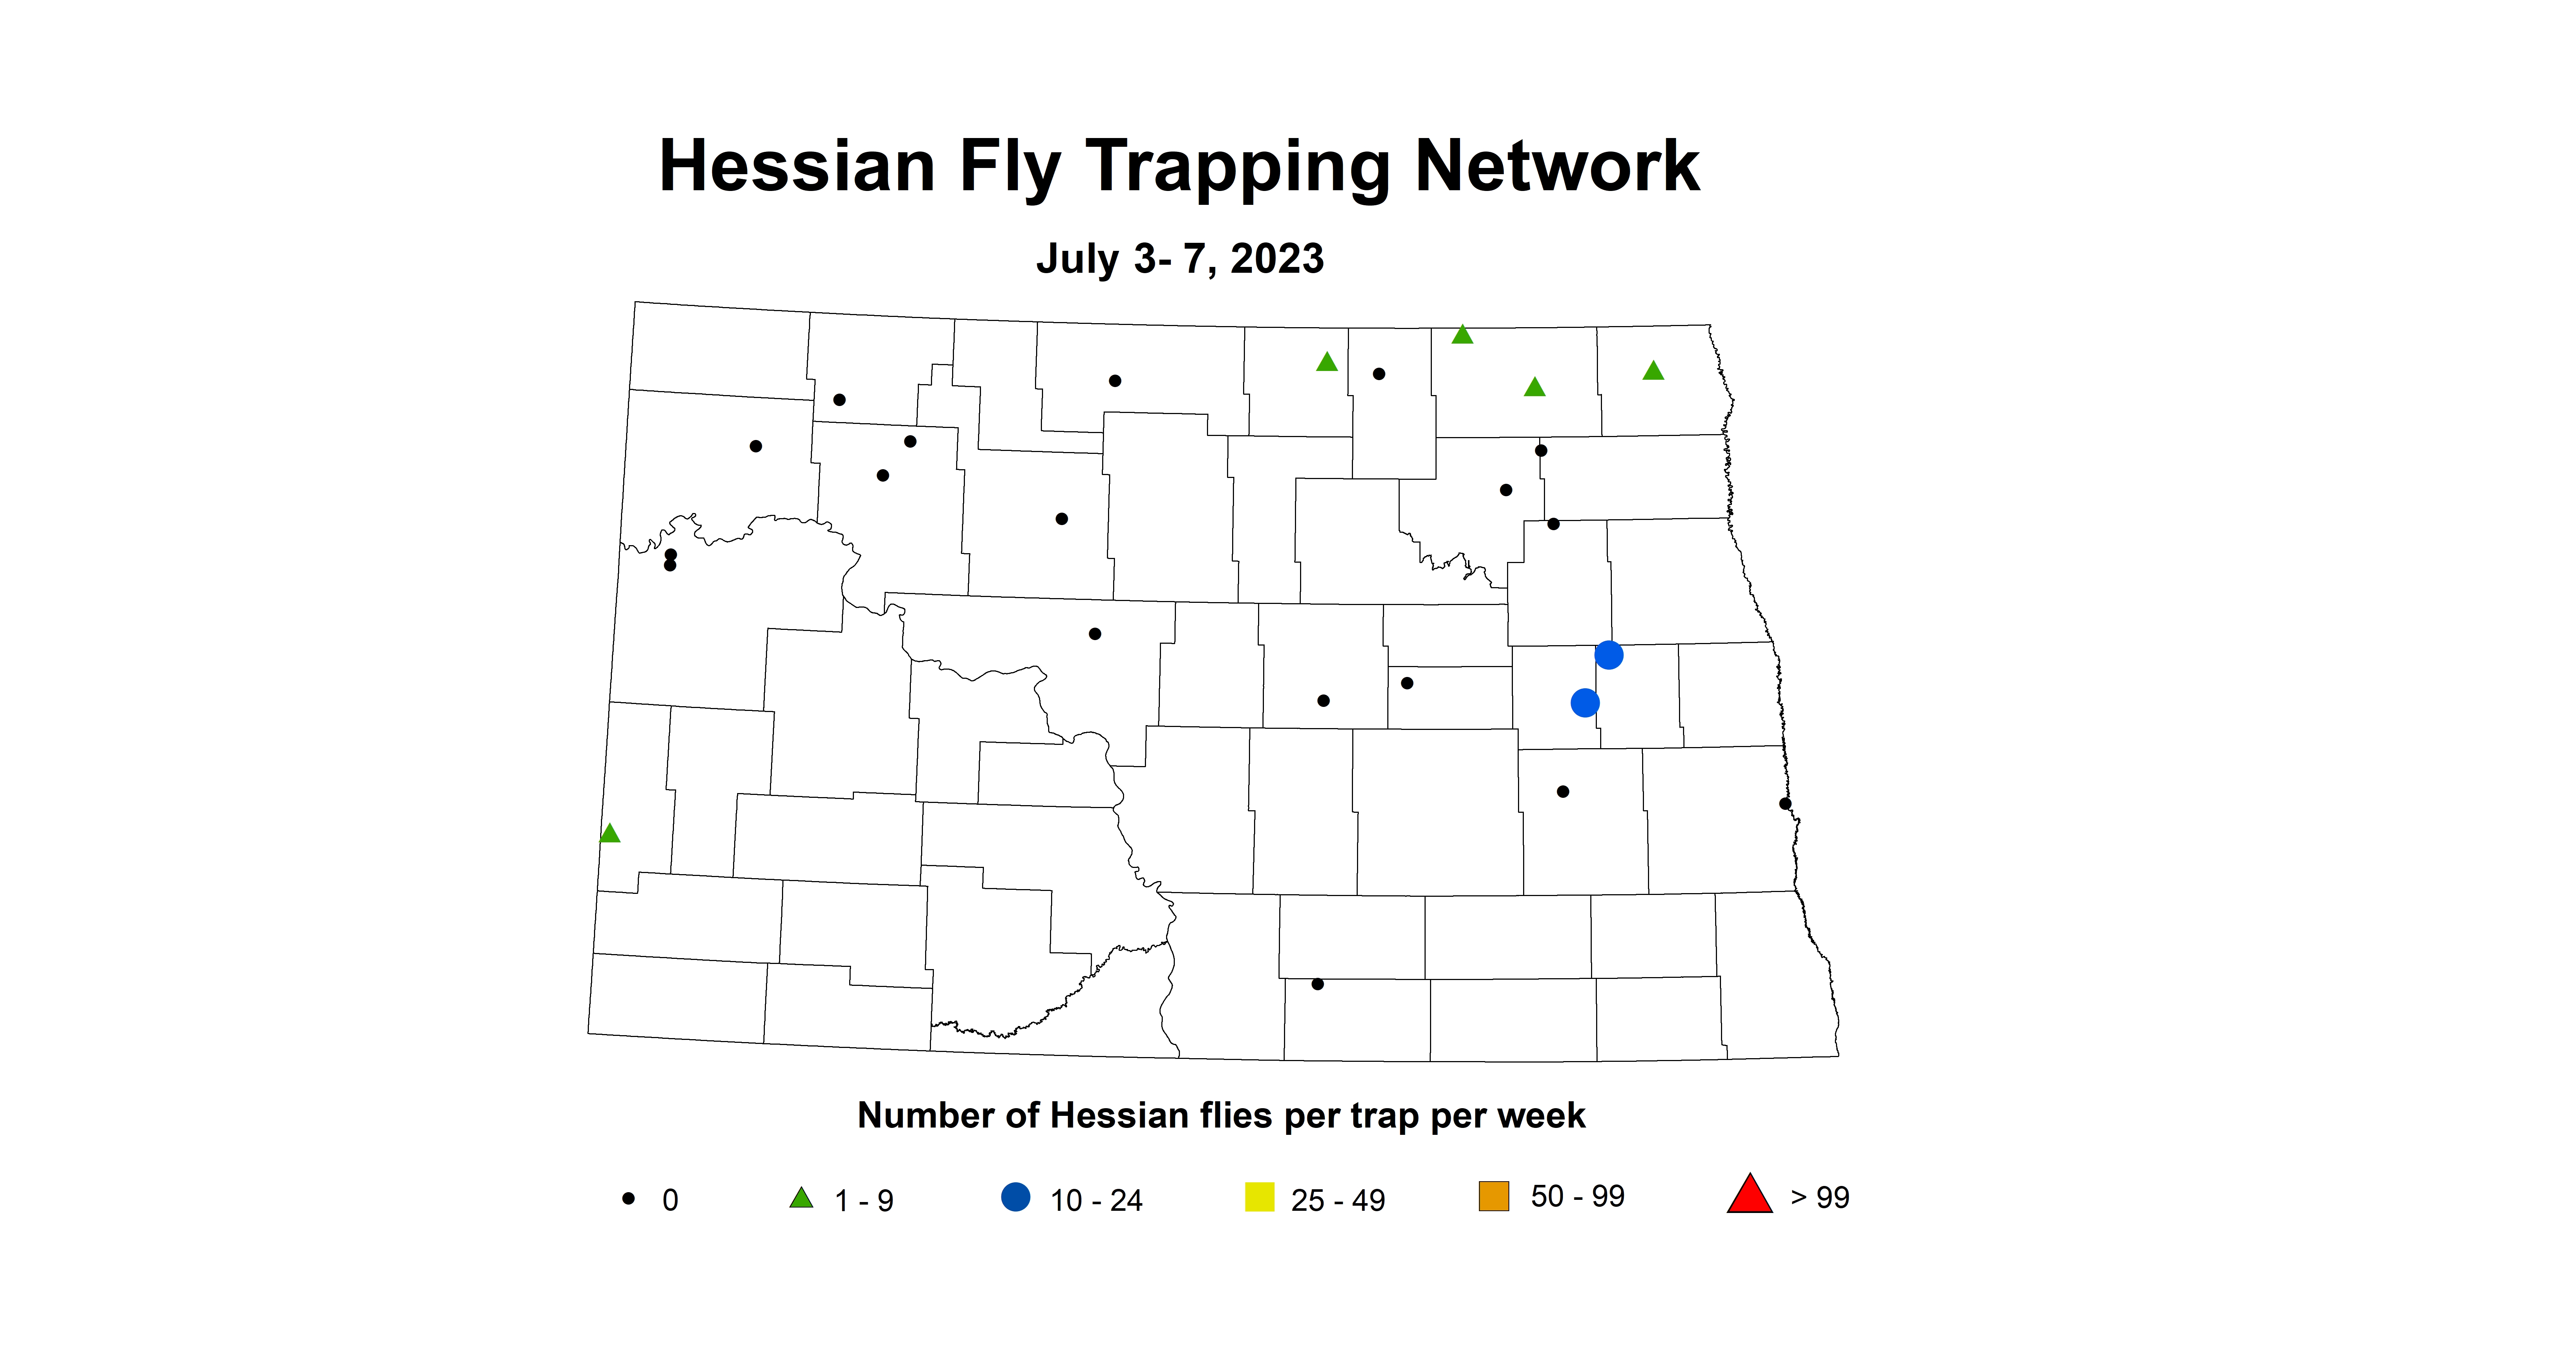 wheat insect trap hessian fly July 3-7 2023